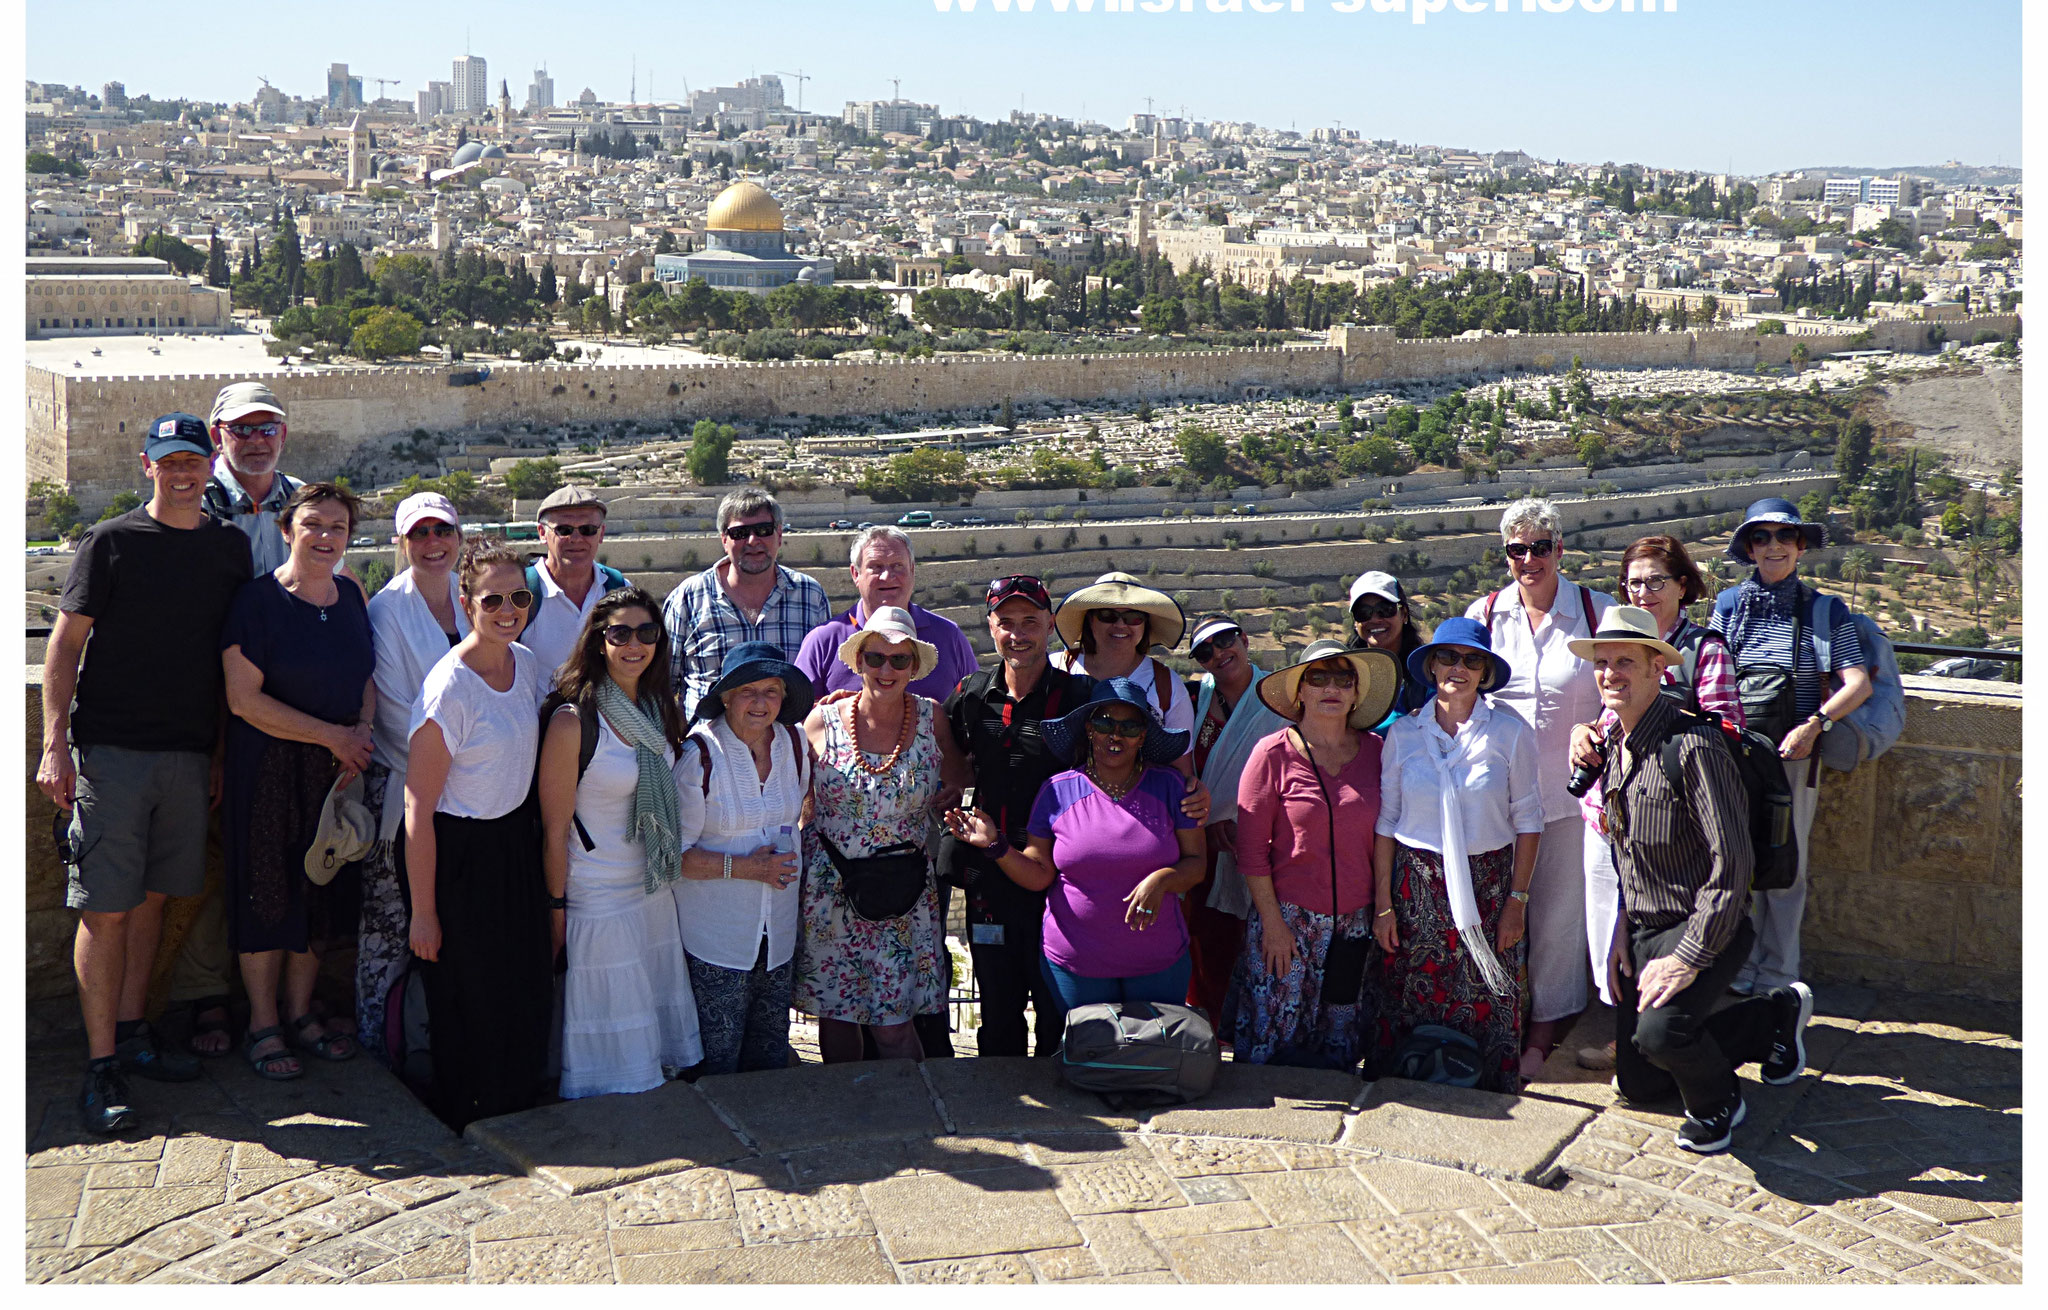 With the South African group on top of Mount of Olives, 2014